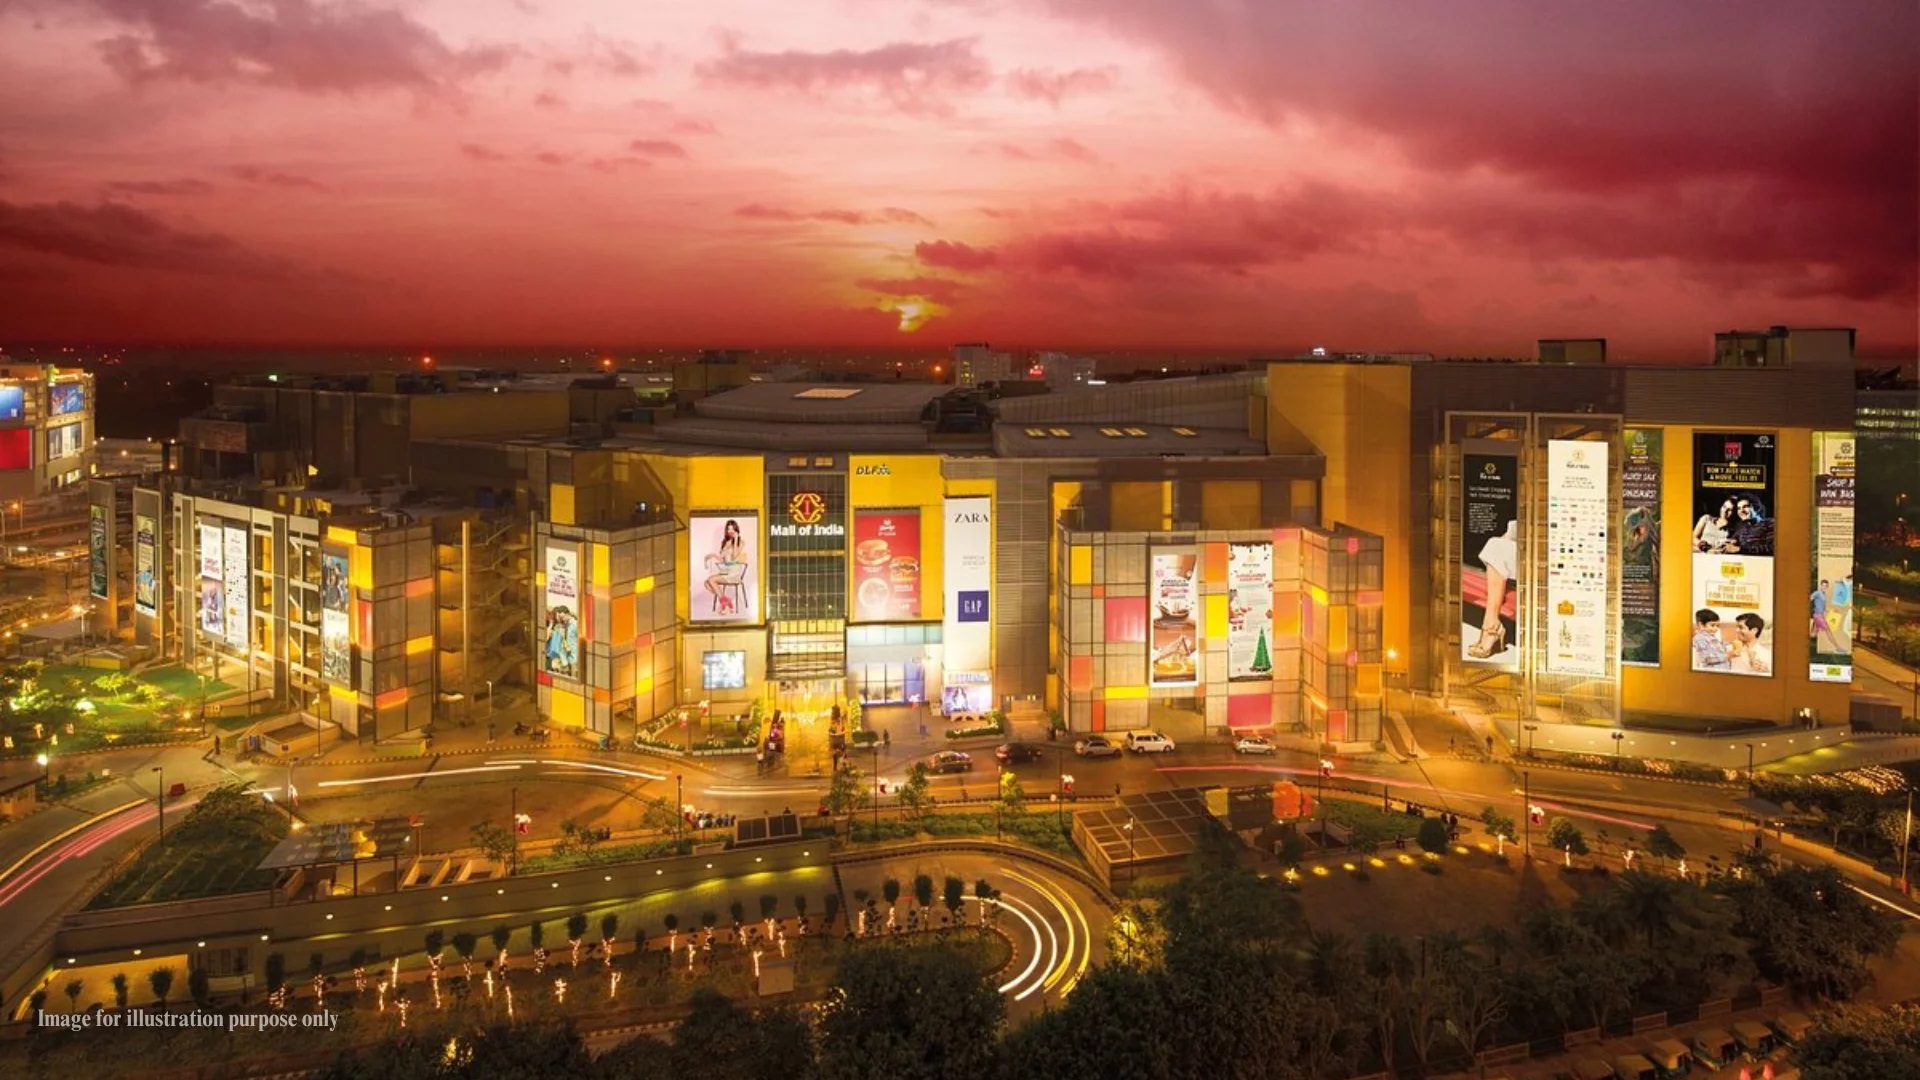 DLF to Invest Rs 2,200 Crore to Build Shopping Mall in Gurugram